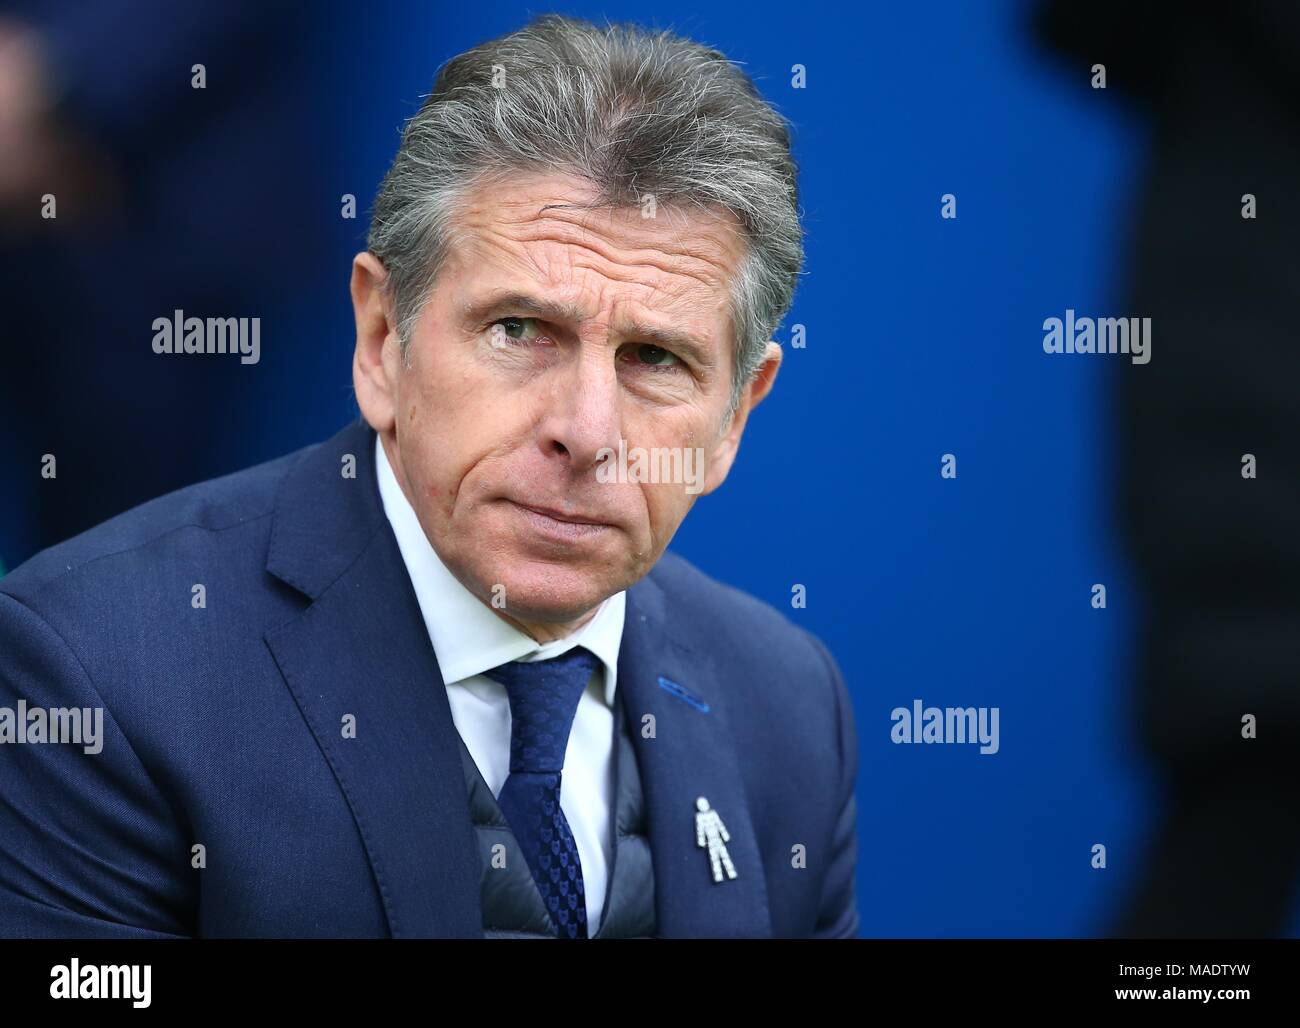 Leicester manager Claude Puel during the Premier League match between Brighton and Hove Albion and Leicester City at the American Express Community Stadium in Brighton and Hove. 31 Mar 2018 *** Editorial use only. No merchandising. For Football images FA and Premier League restrictions apply inc. no internet/mobile usage without FAPL license - for details contact Football Dataco *** Stock Photo